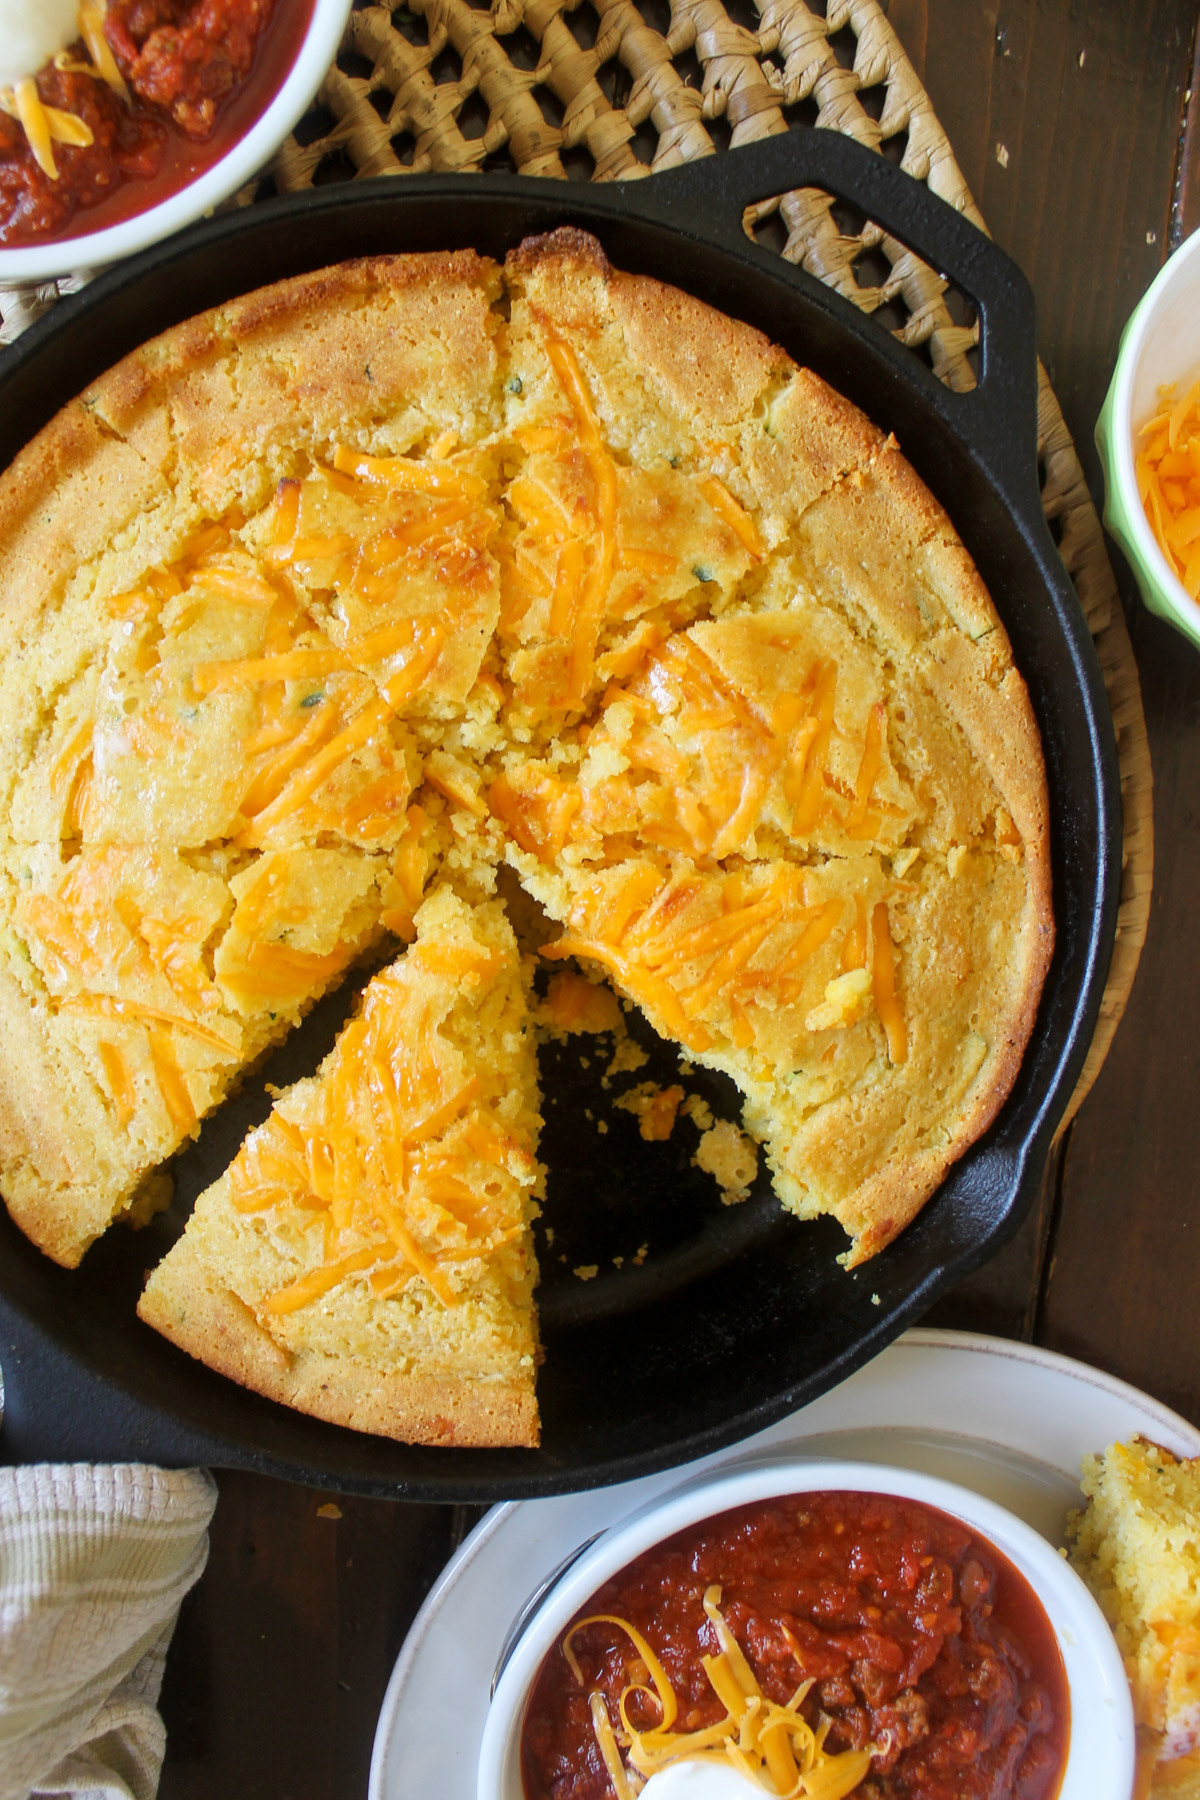 A cast iron skillet of cornbread surrounded by bowls of chili.